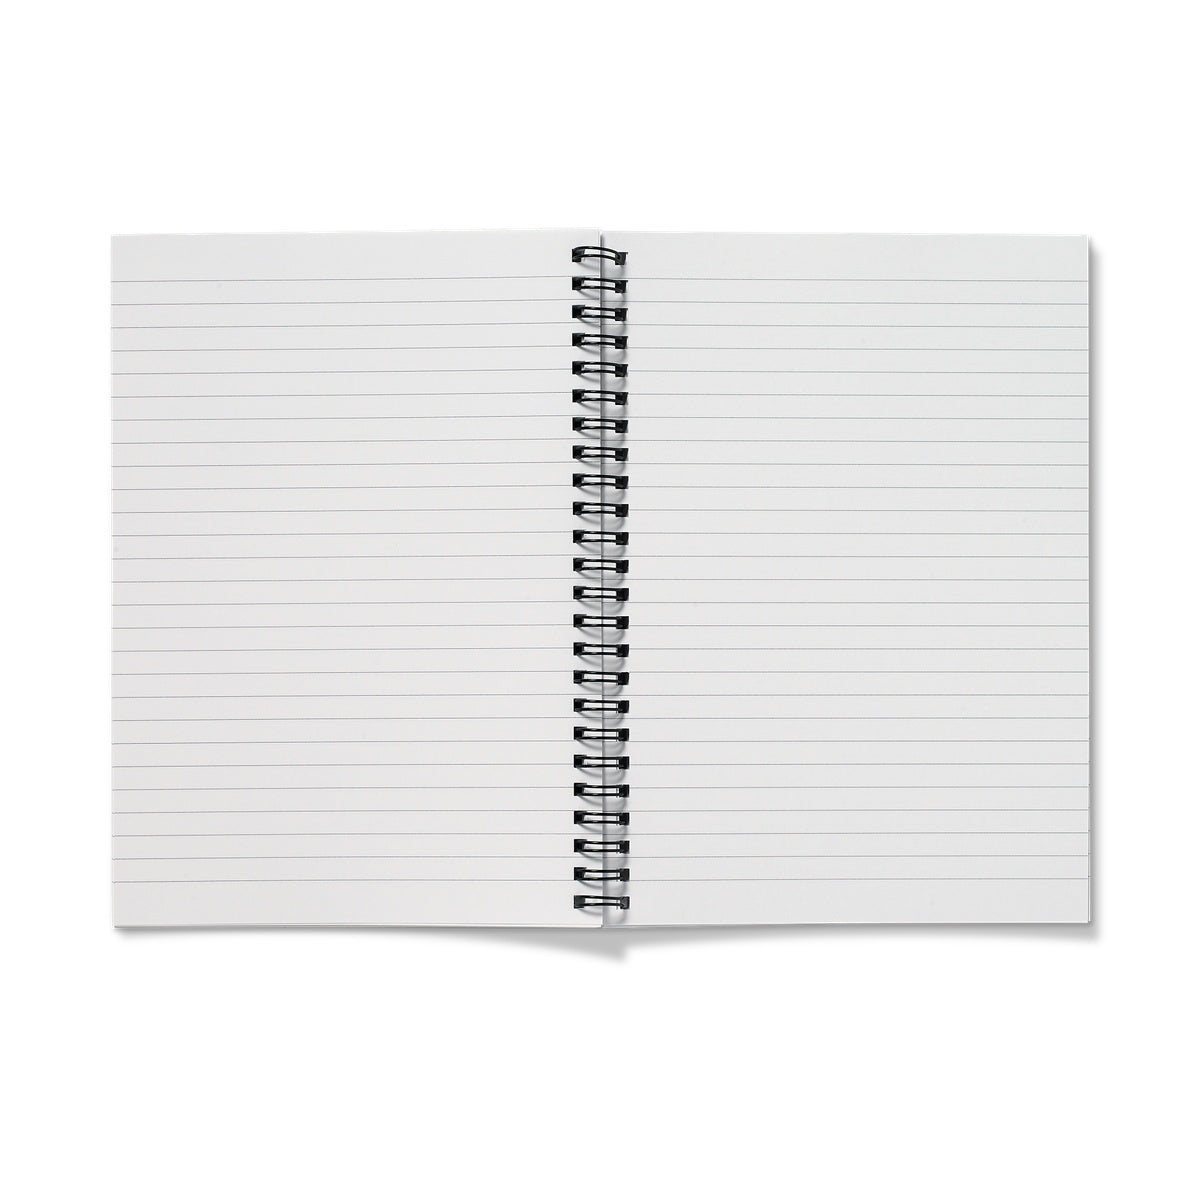 Revision Notes Notebook